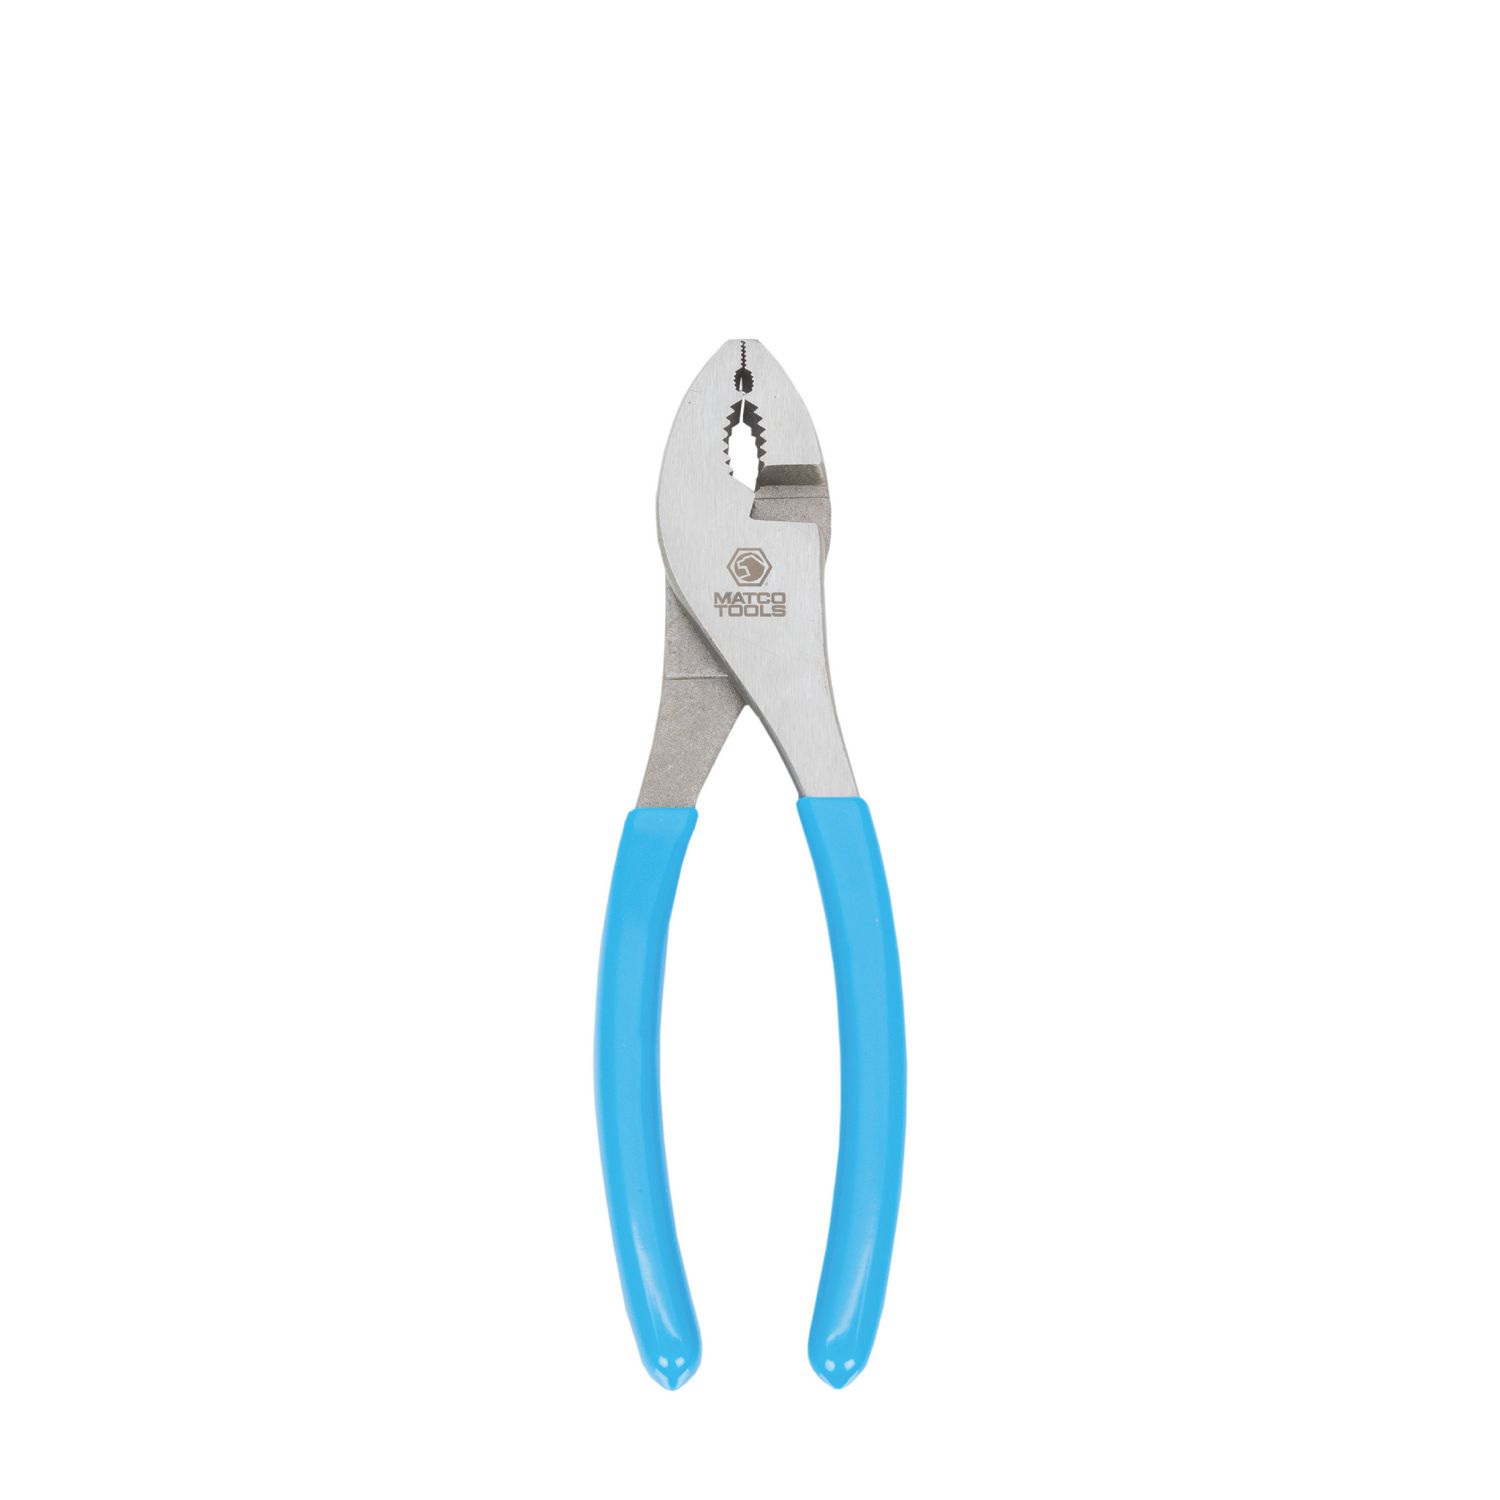 Pliers set, carbon steel and vinyl, blue, 3- to 4-inch mini with 8